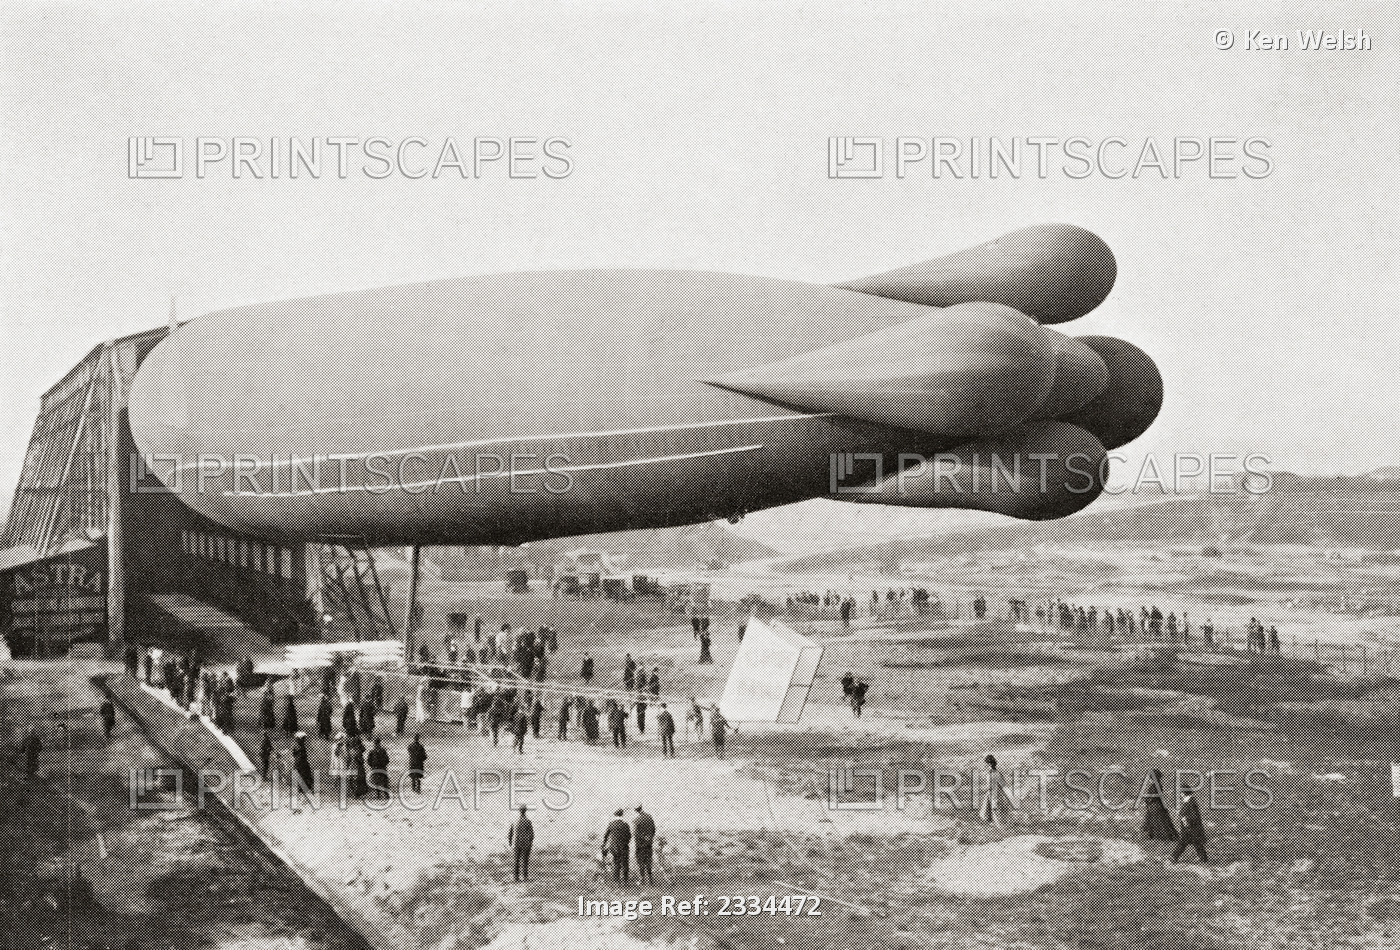 A Clément-Bayard Airship in 1909.  From The Wonderful Year 1909